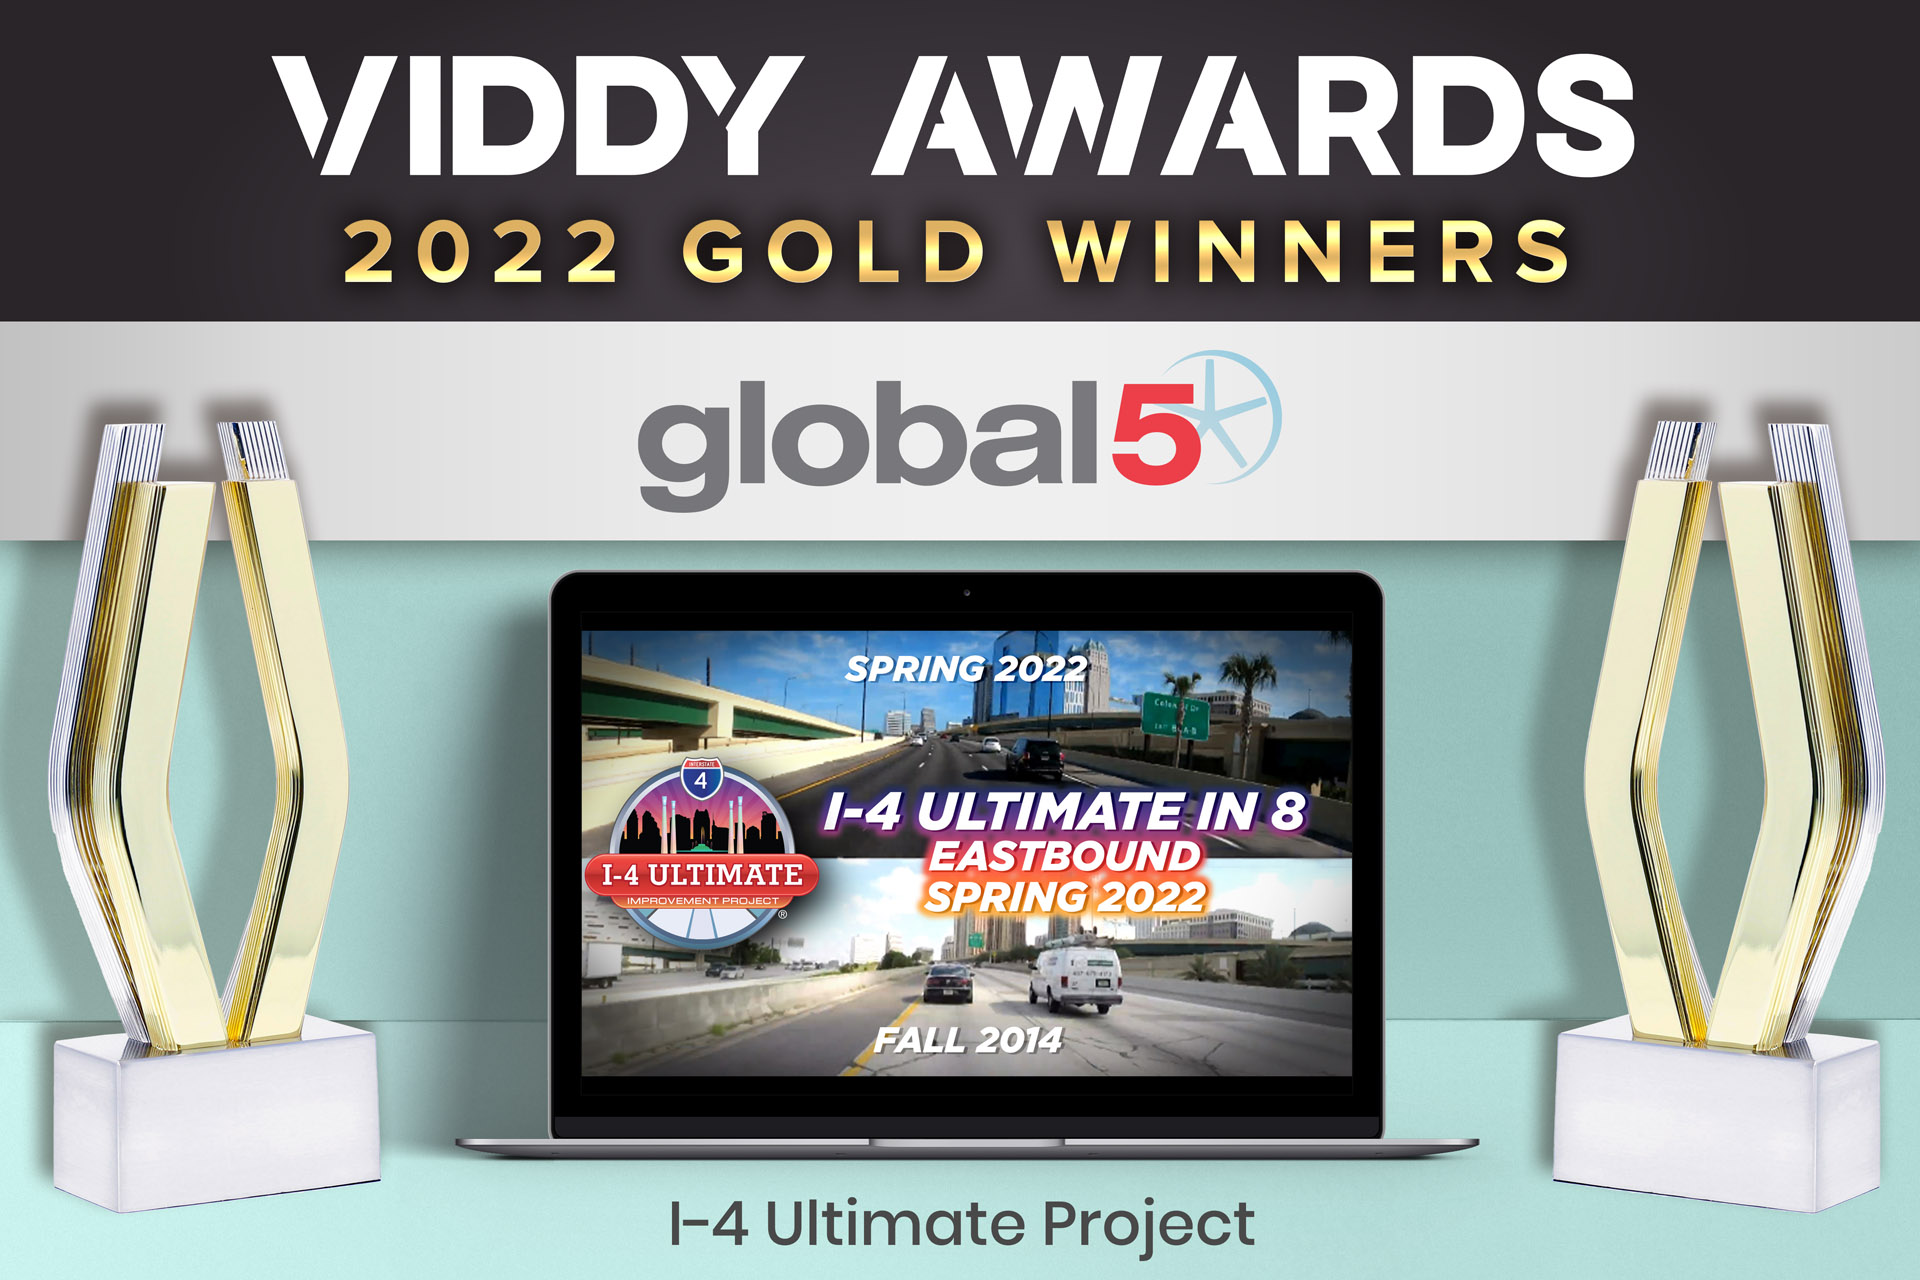 Global-5 Recognized for Innovation in Video Production